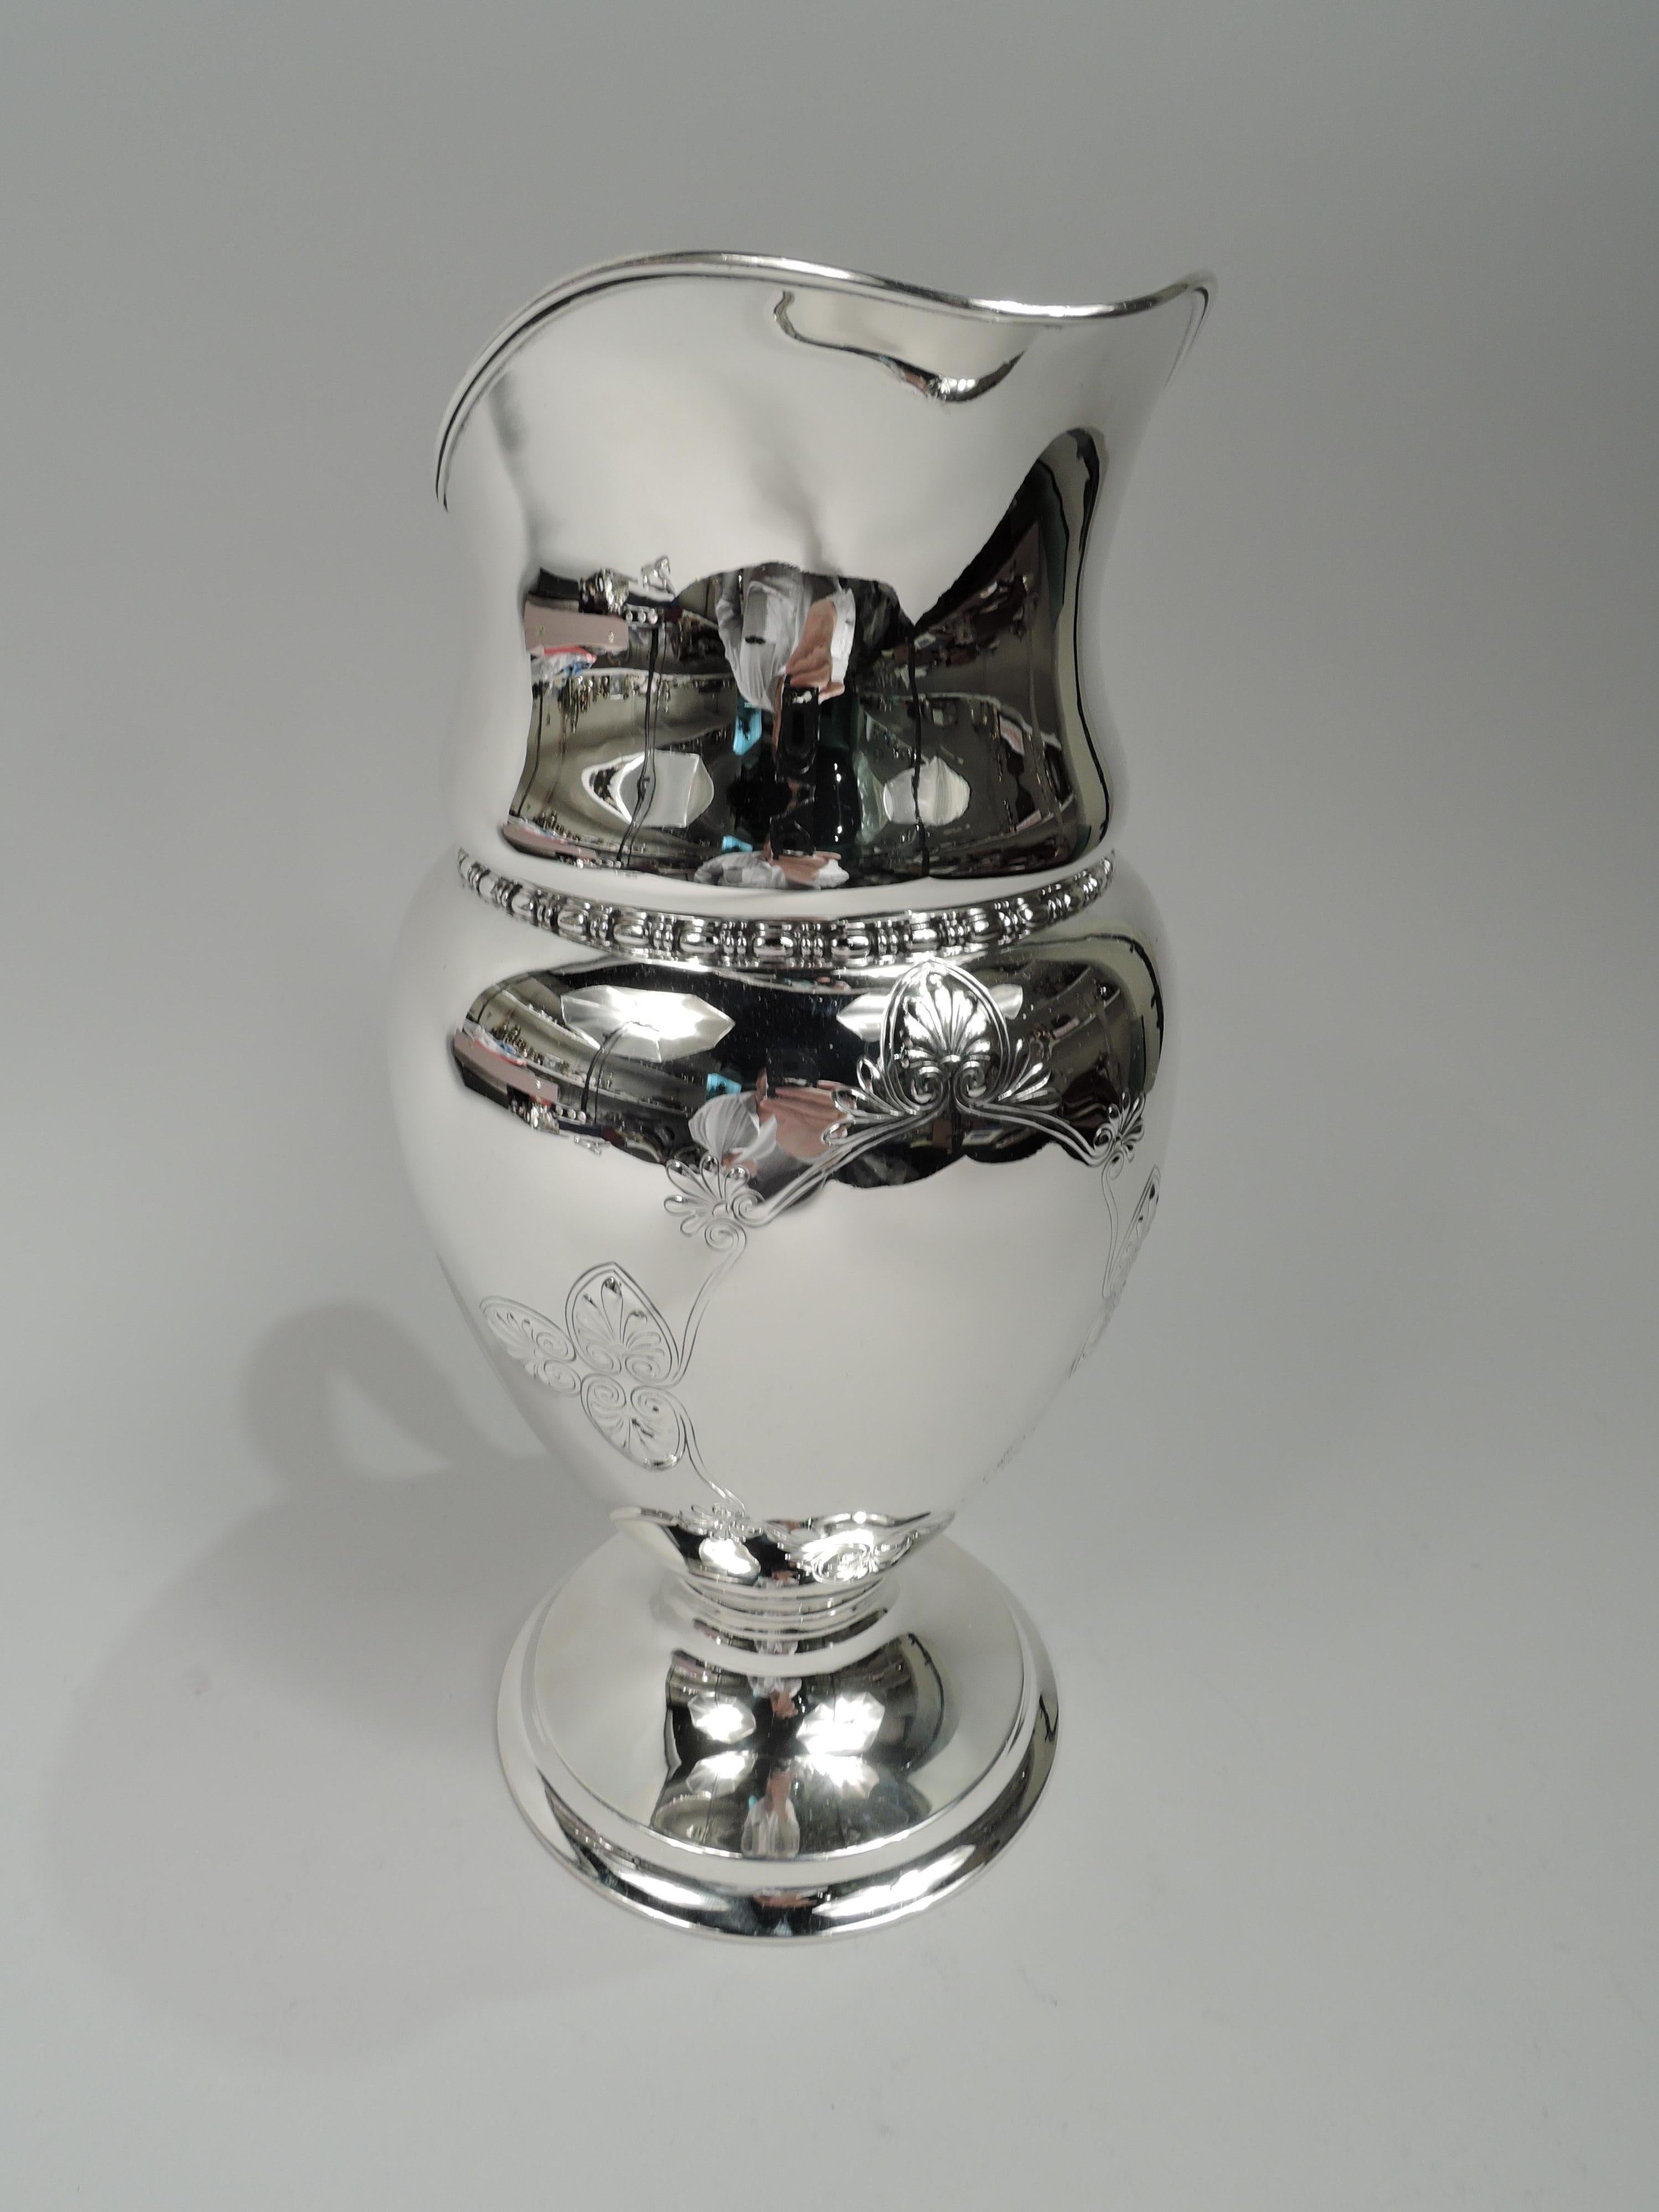 Edwardian Classical sterling silver water pitcher. Made by Tiffany & Co. in New York. Oval body on raised round foot. High-looping handle and helmet mouth. Chased oval frame with palmettes and acanthus leaves. Bead-and-reel border. Fully marked